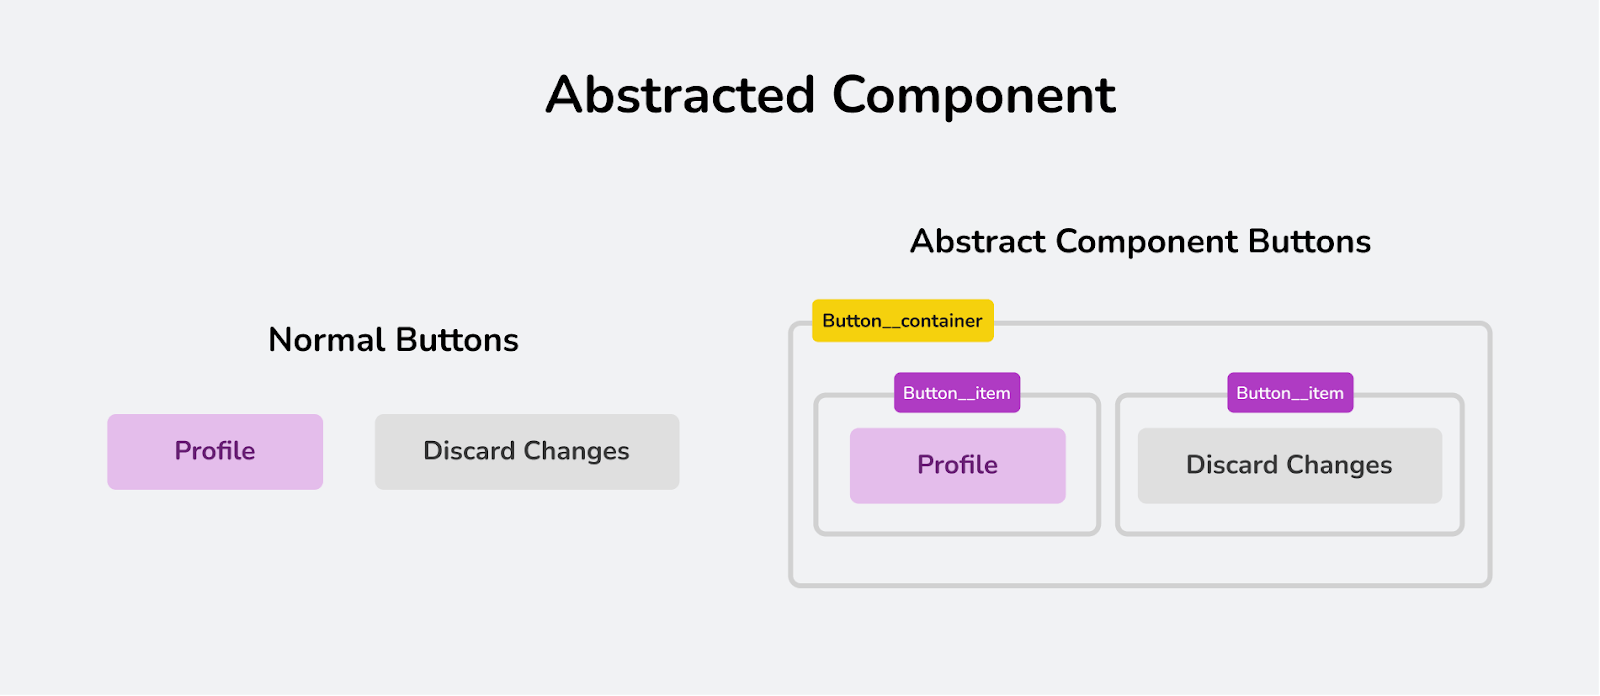 Using abstracted components 